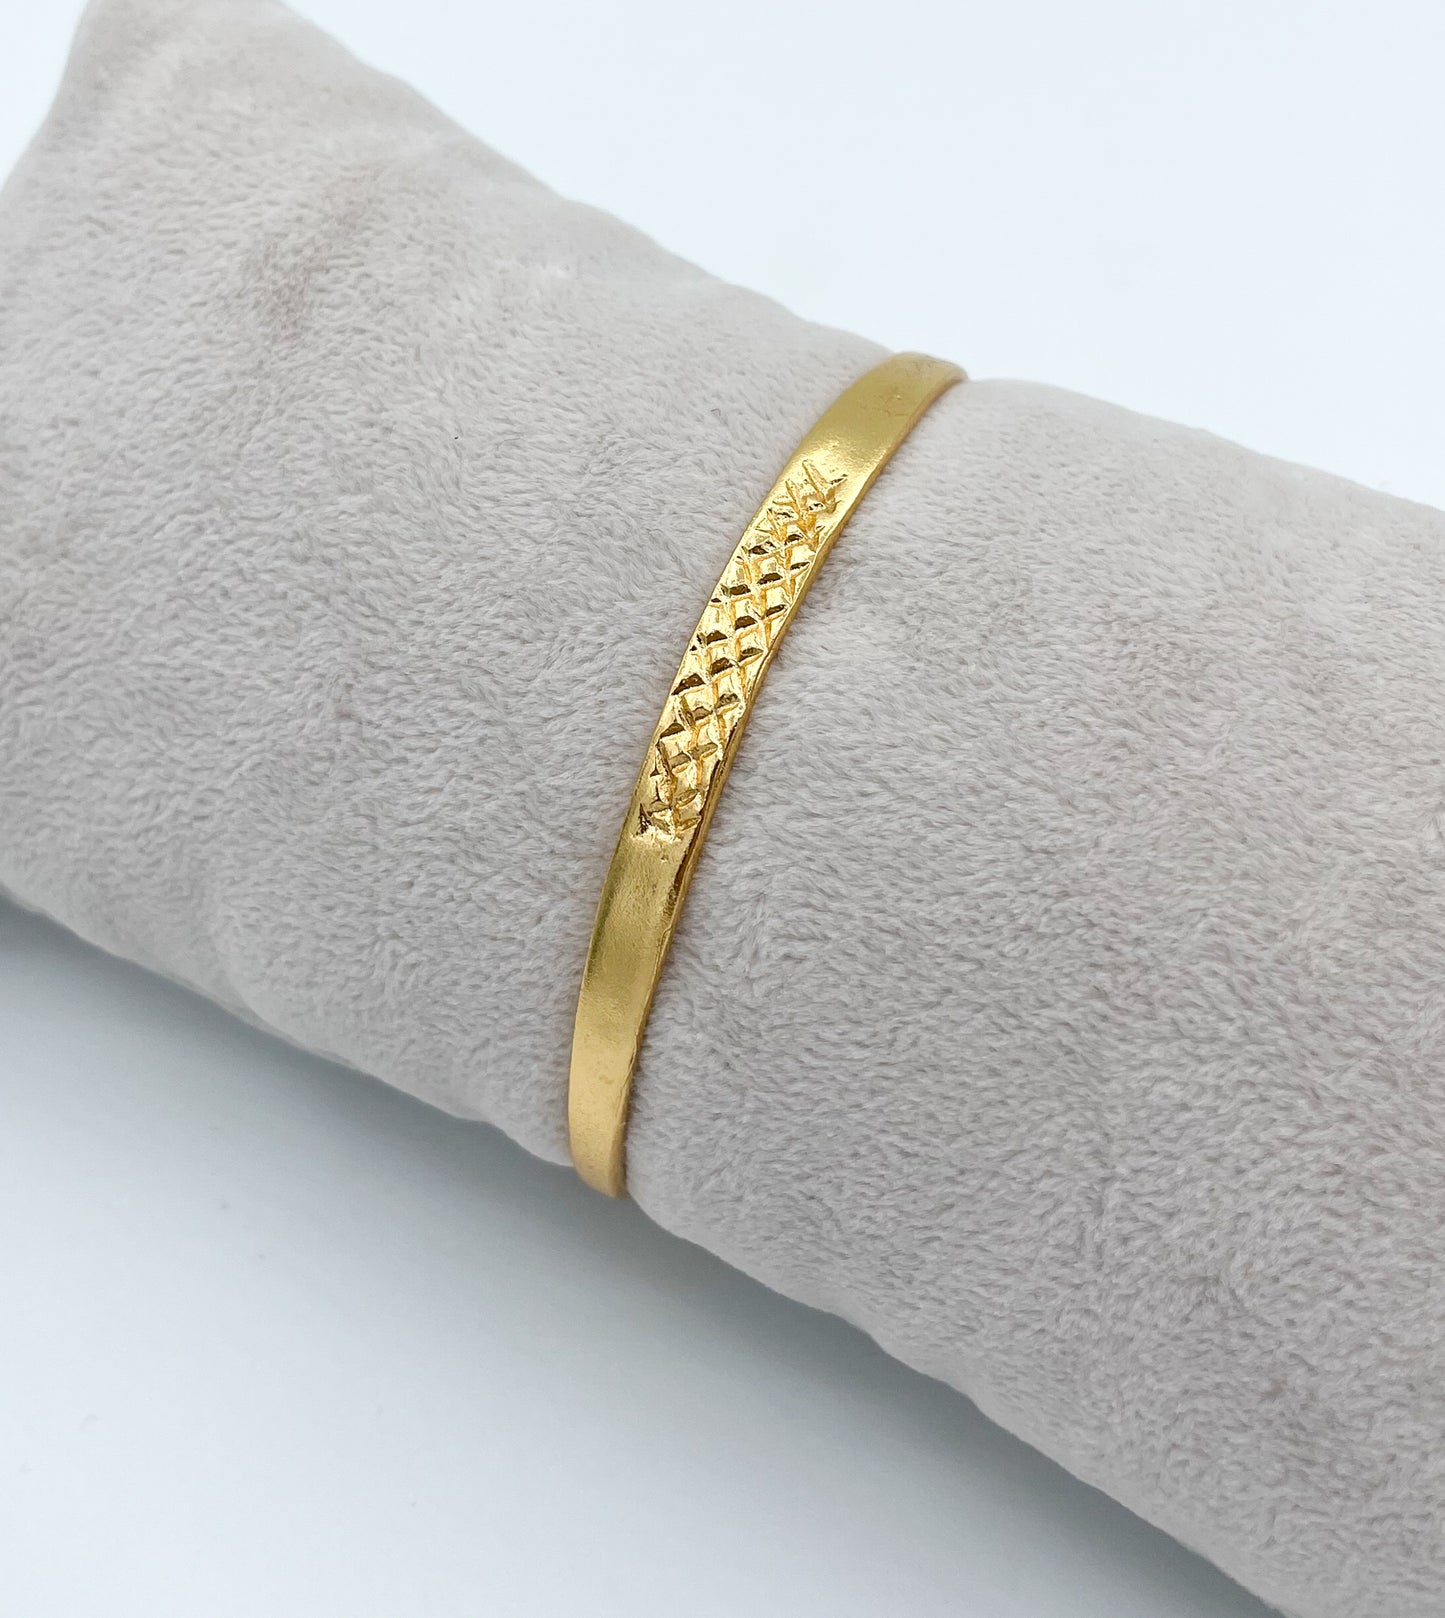 Handmade gold plated engraved cuff